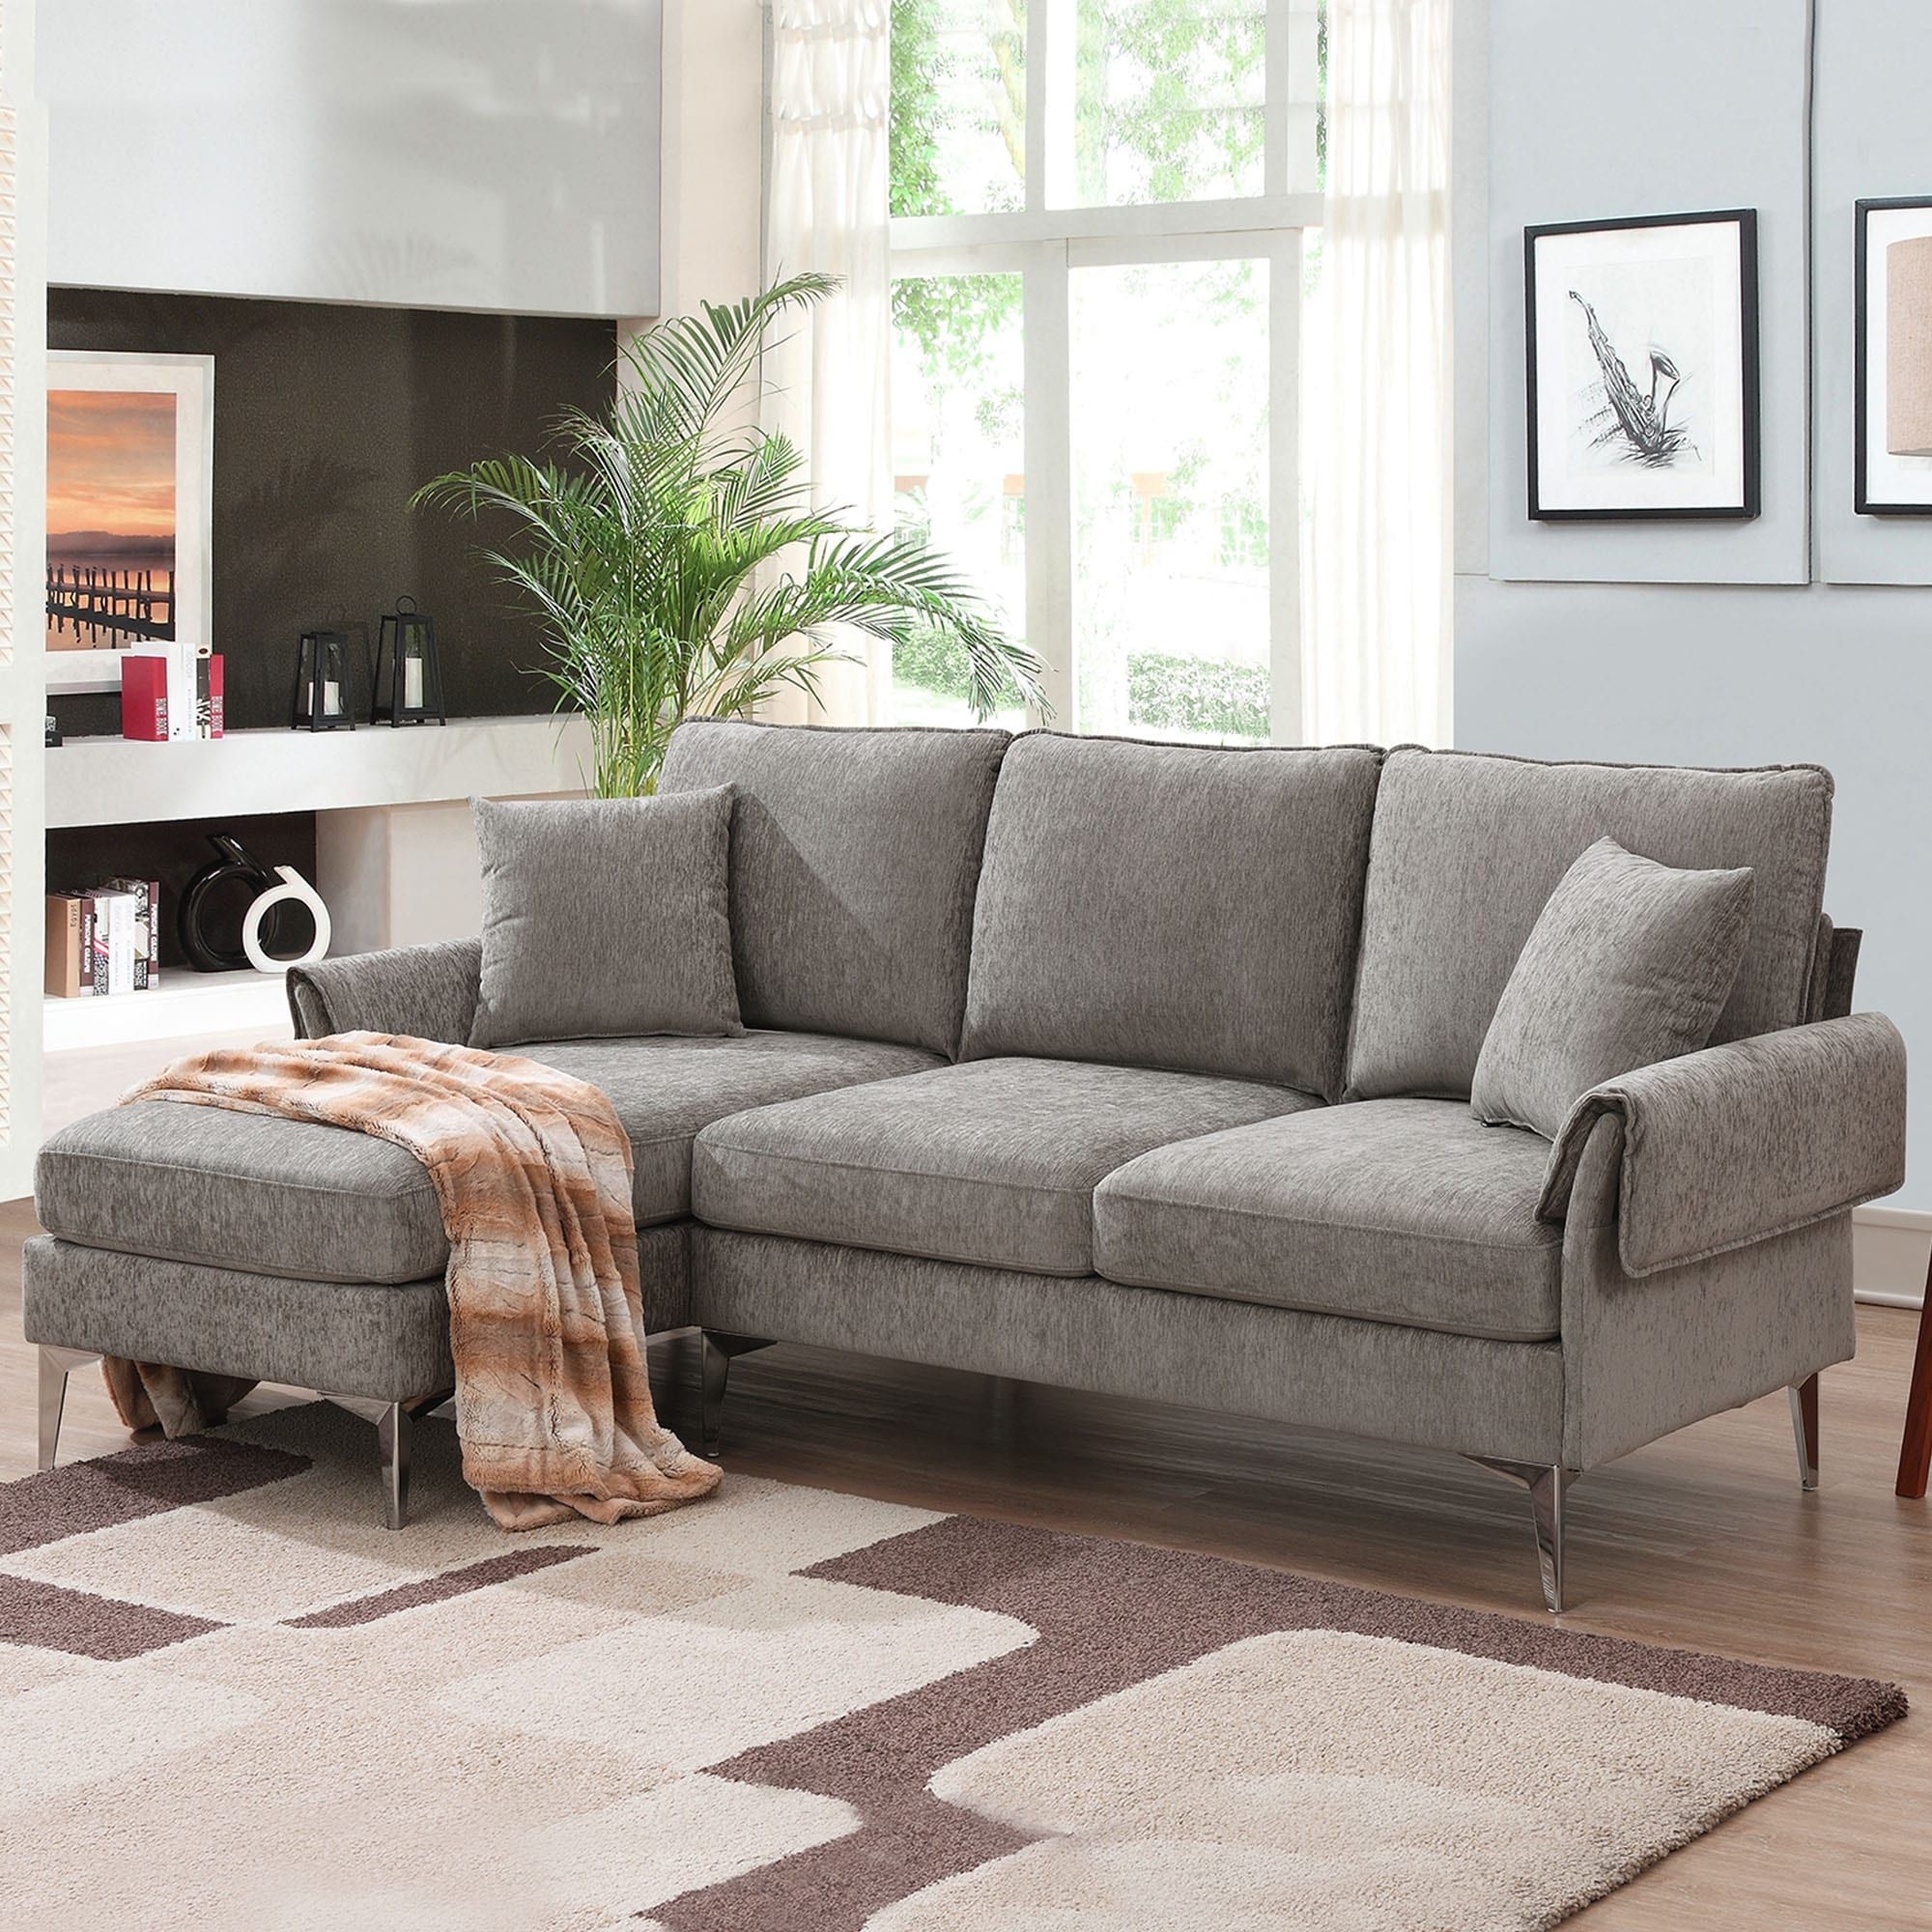 Modern Convertible Sectional Sofa, L Shaped Couch W/reversible Chaise And 2  Pillows – Bed Bath & Beyond – 37256829 In Convertible L Shaped Sectional Sofas (View 12 of 24)